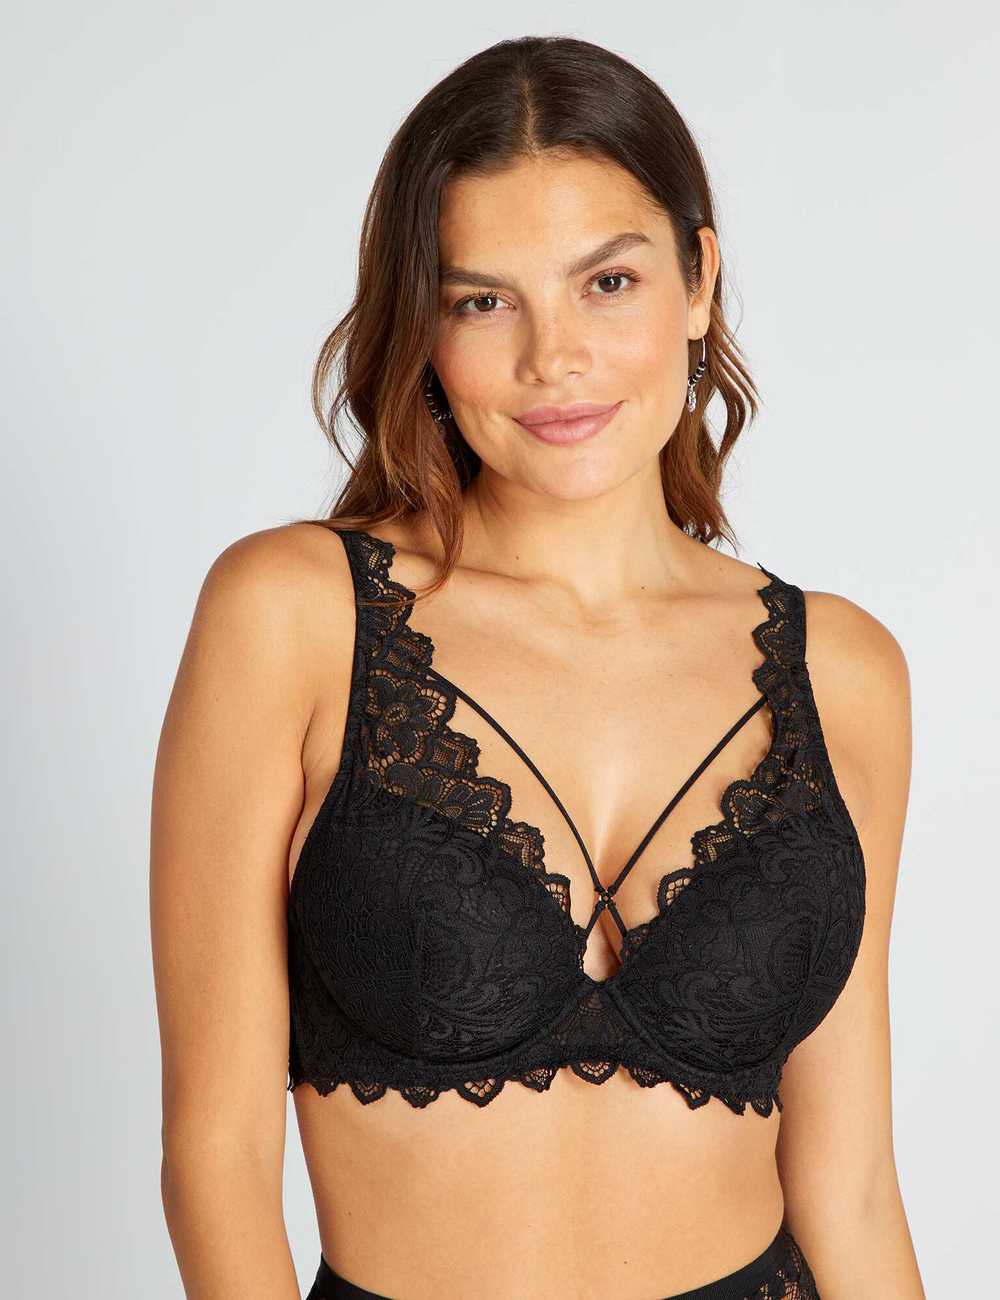 Lace bra for D&E cups